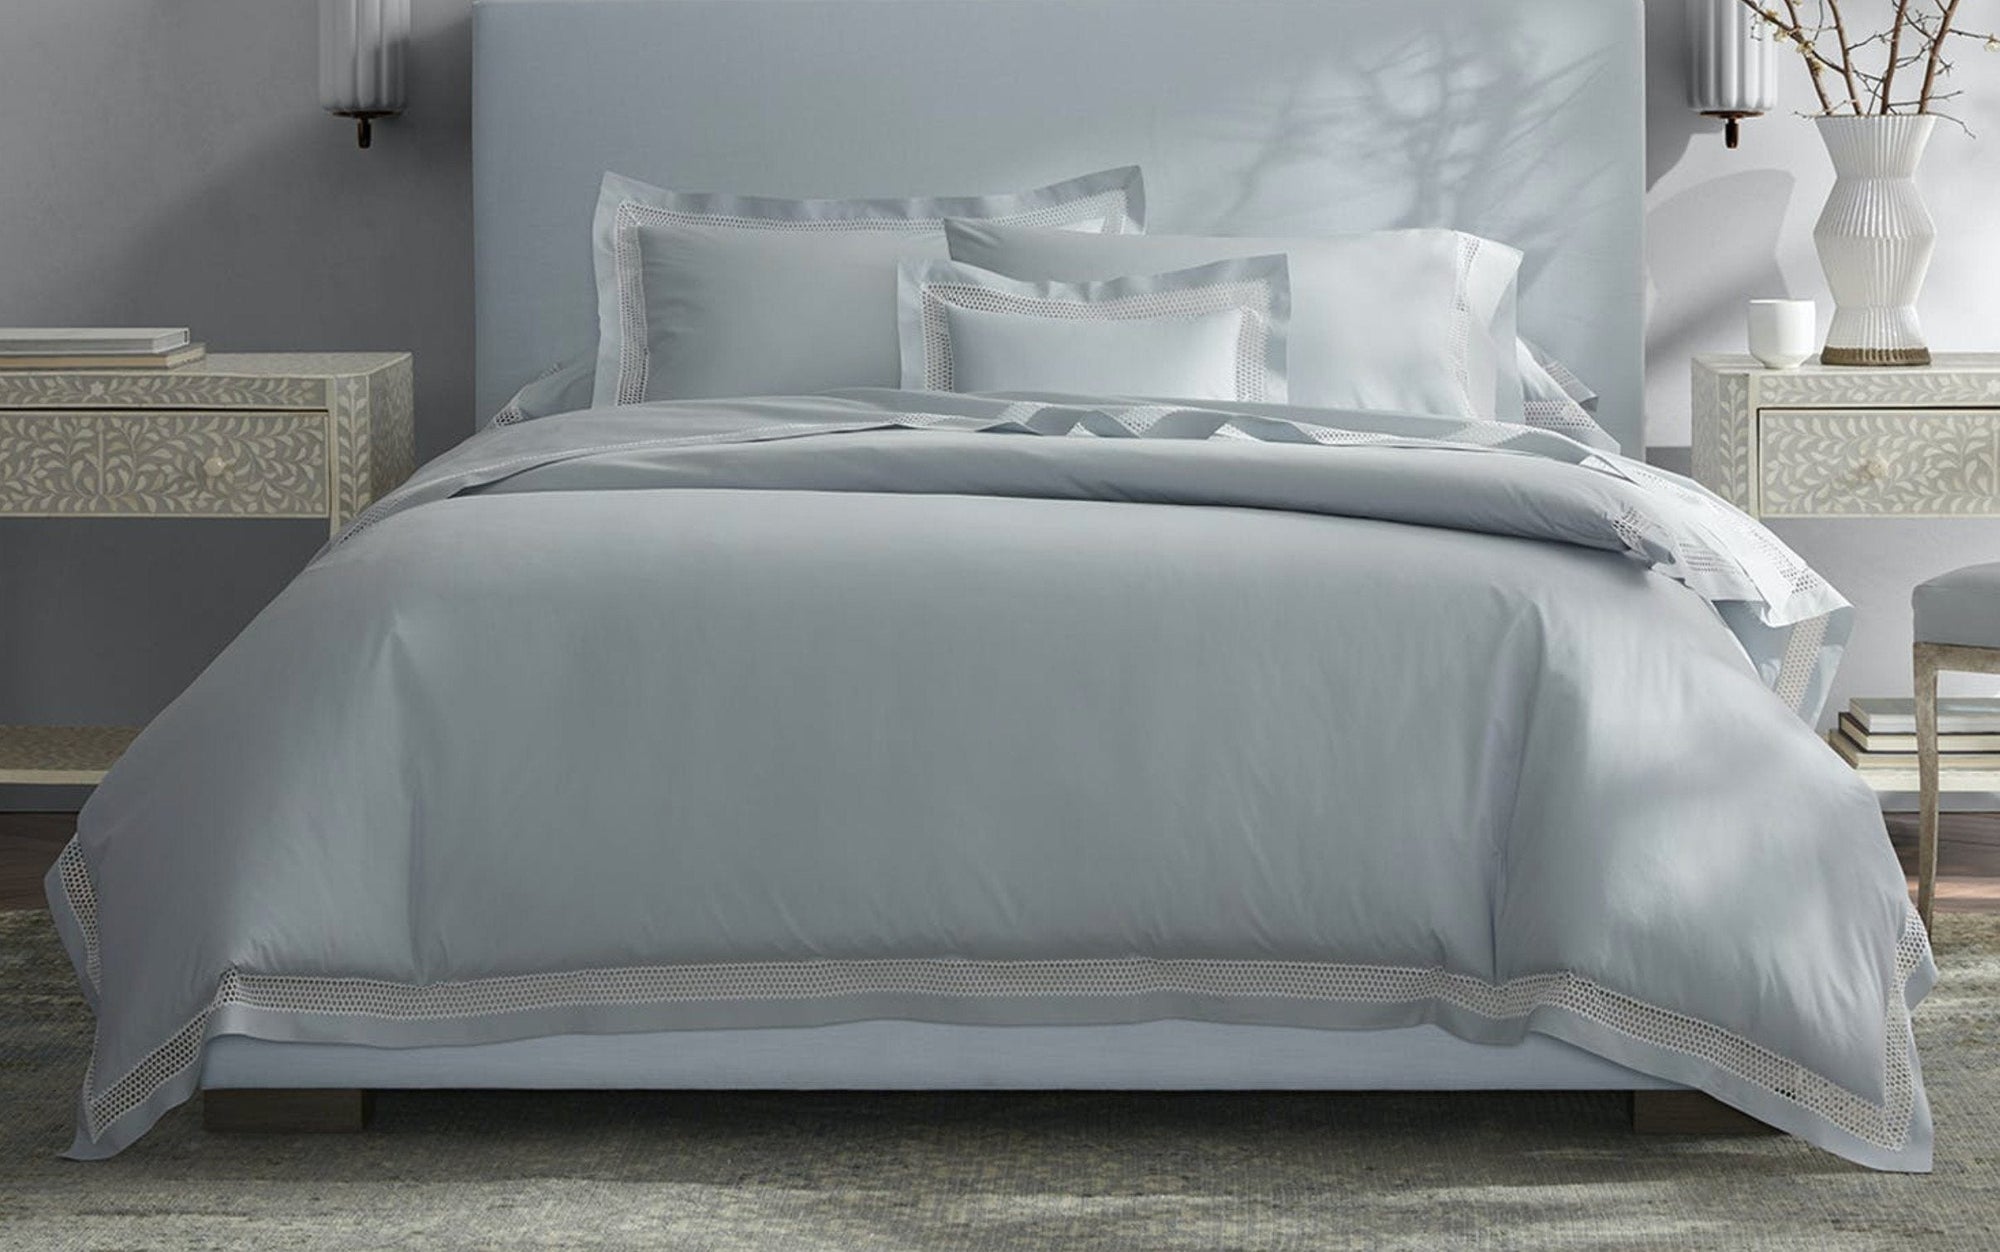 Matouk Cecily Lace Bedding - Giza Percale at Fig Linens